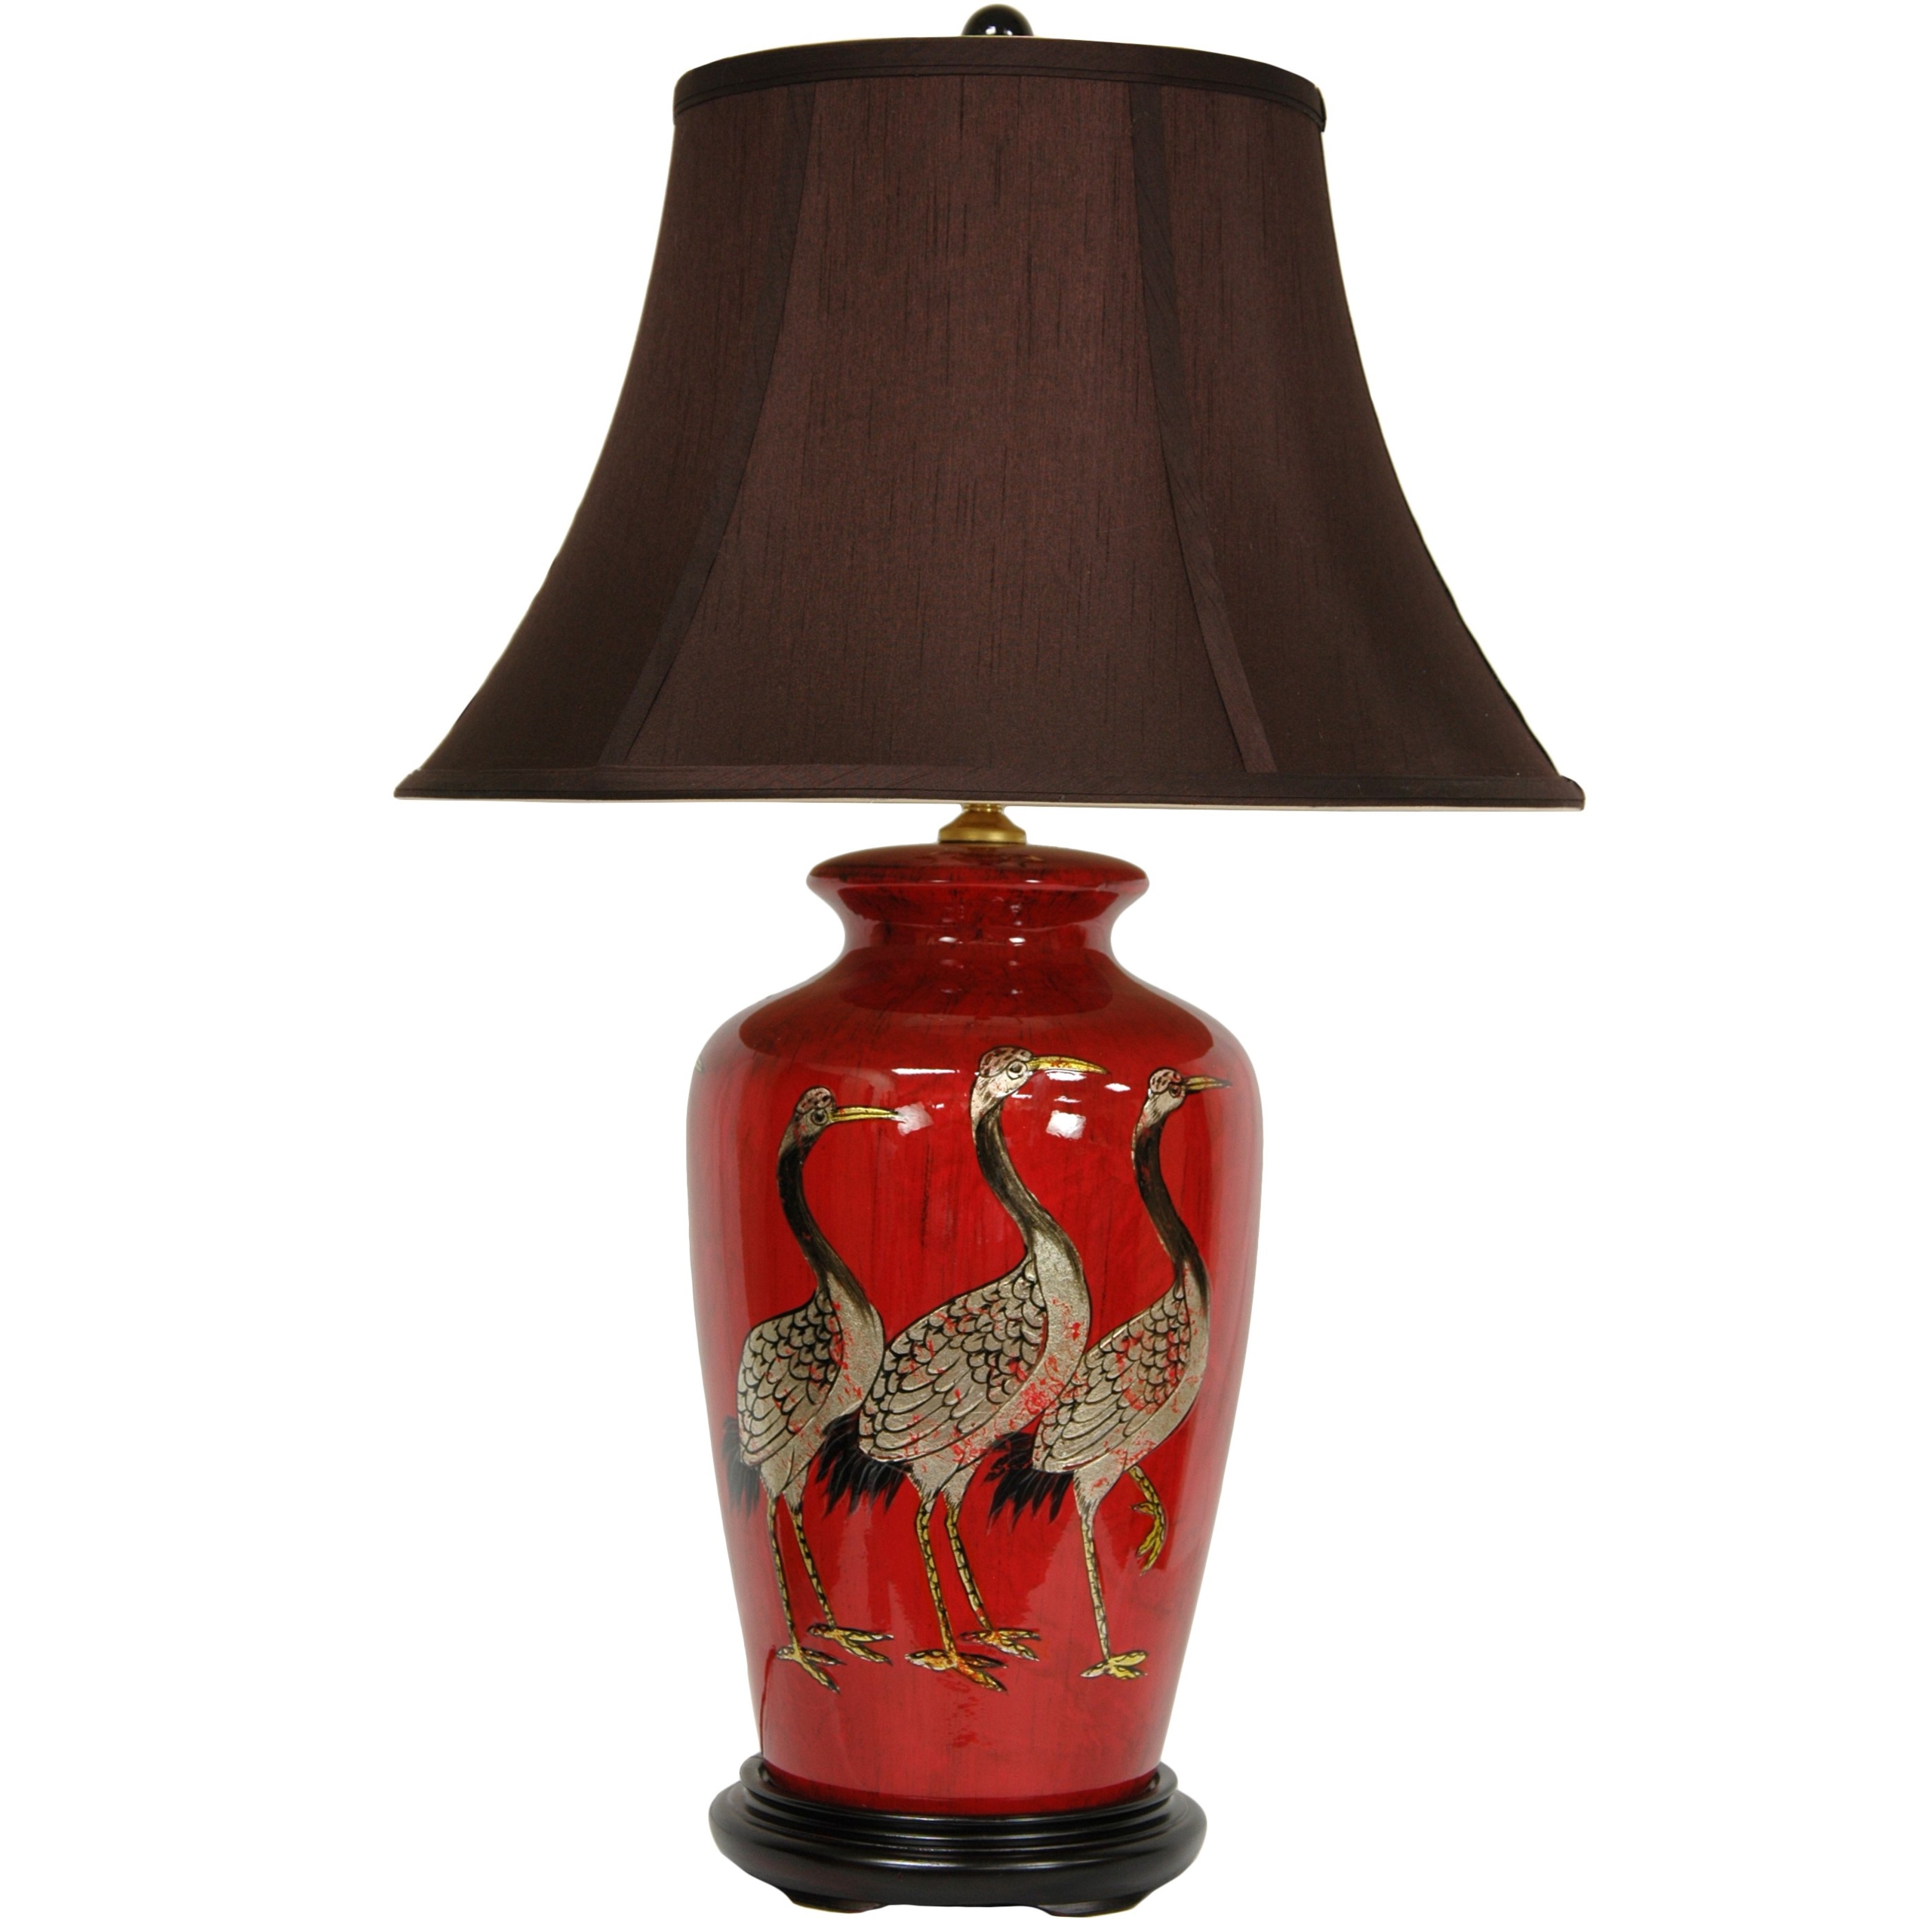 Crowned Cranes Vase 26" H Table Lamp with Bell Shade